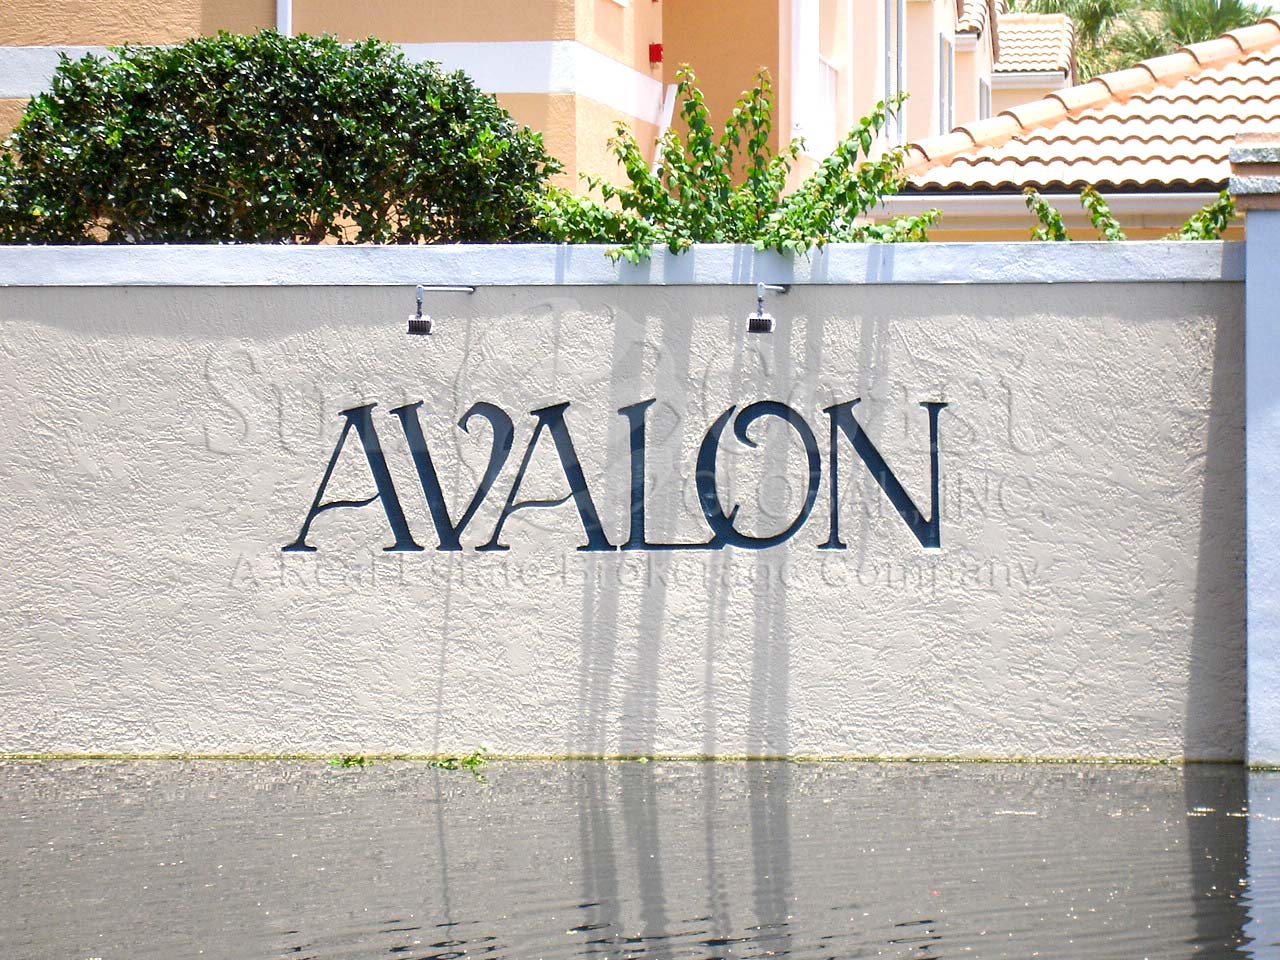 Avalon at Pelican Bay sign